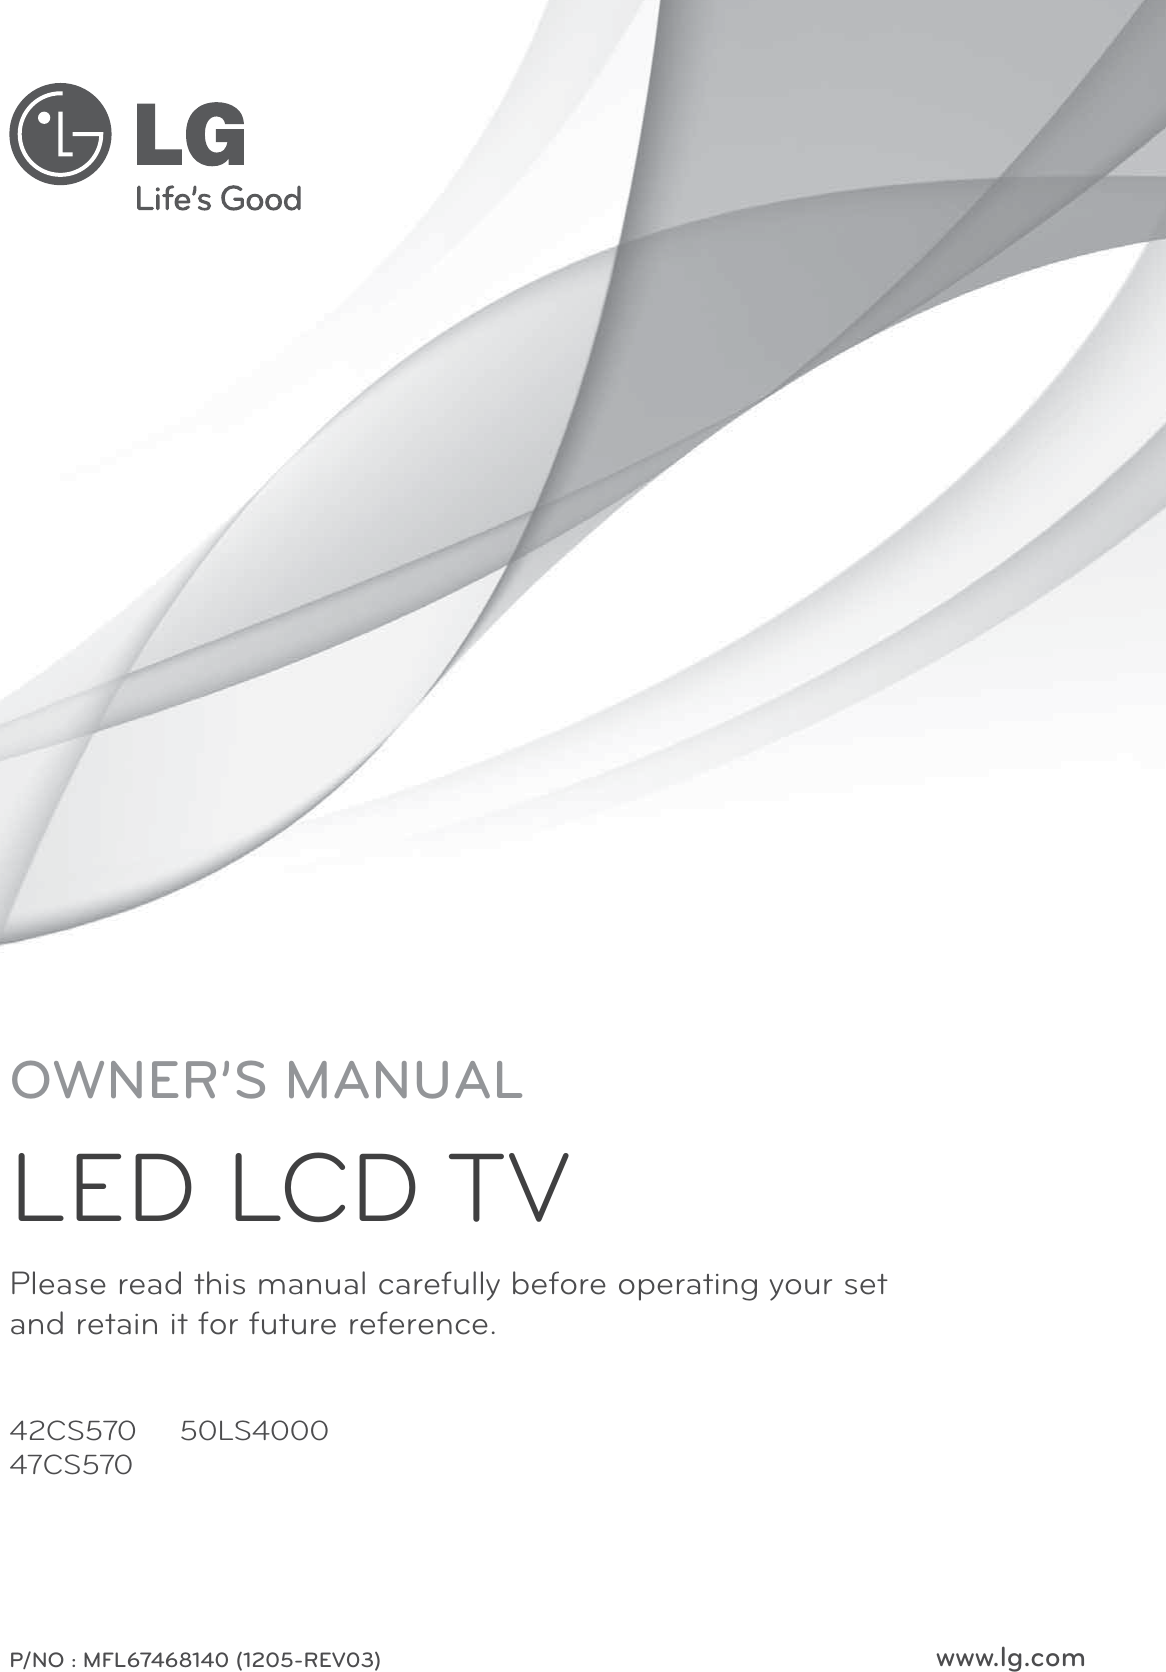 www.lg.comPlease read this manual carefully before operating your set  and retain it for future reference.P/NO : MFL67468140 (1205-REV03)OWNER’S MANUALLED LCD TV42CS57047CS57050LS4000